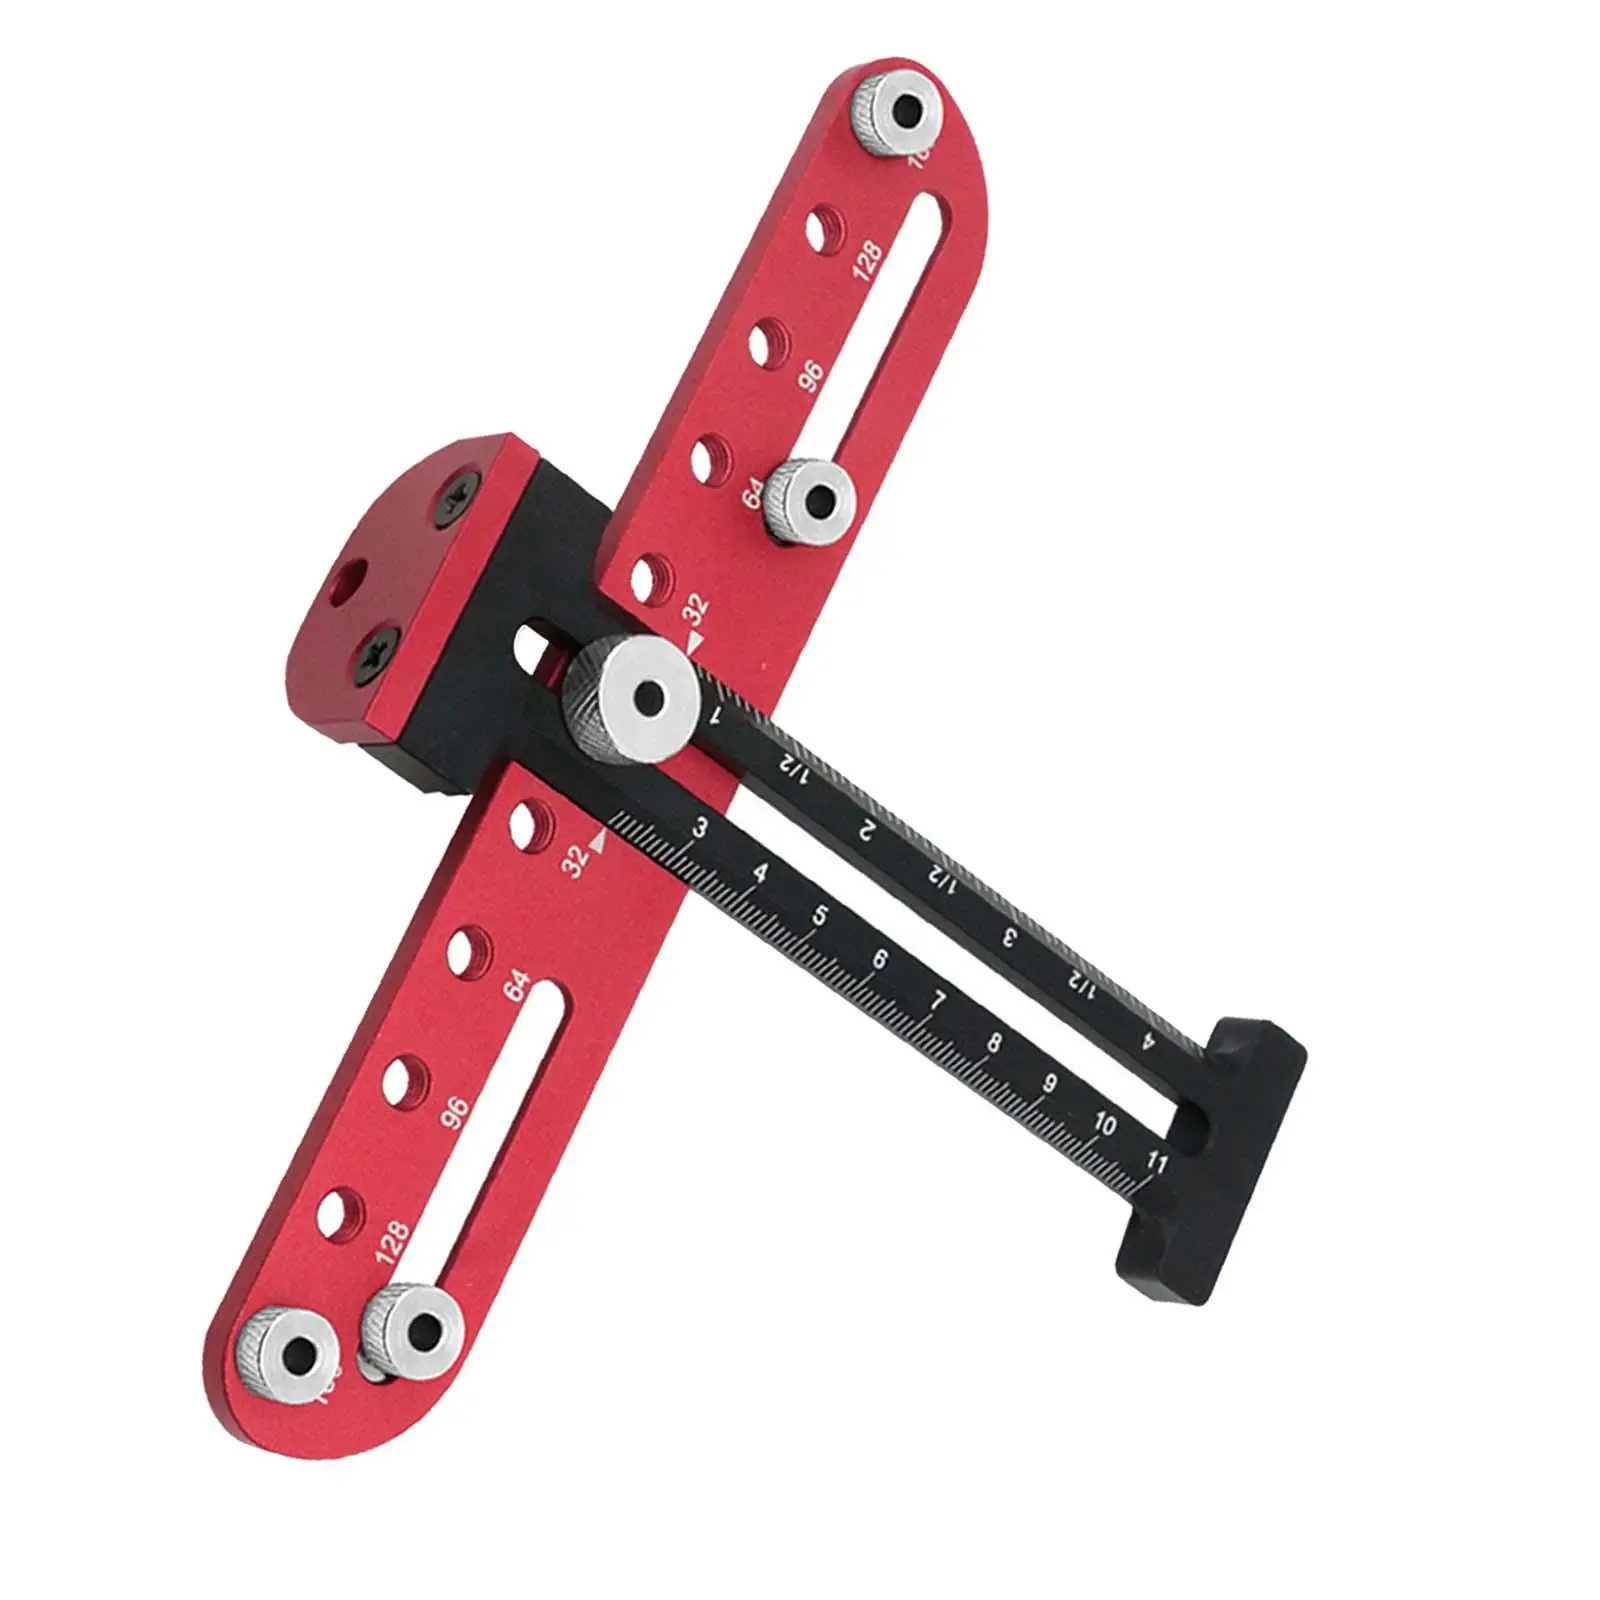 punch Template, Wardrobe Drill Guide Ruler Measure Tool Cabinet Hardware Jig Tool Adjustable Hole Punch ,